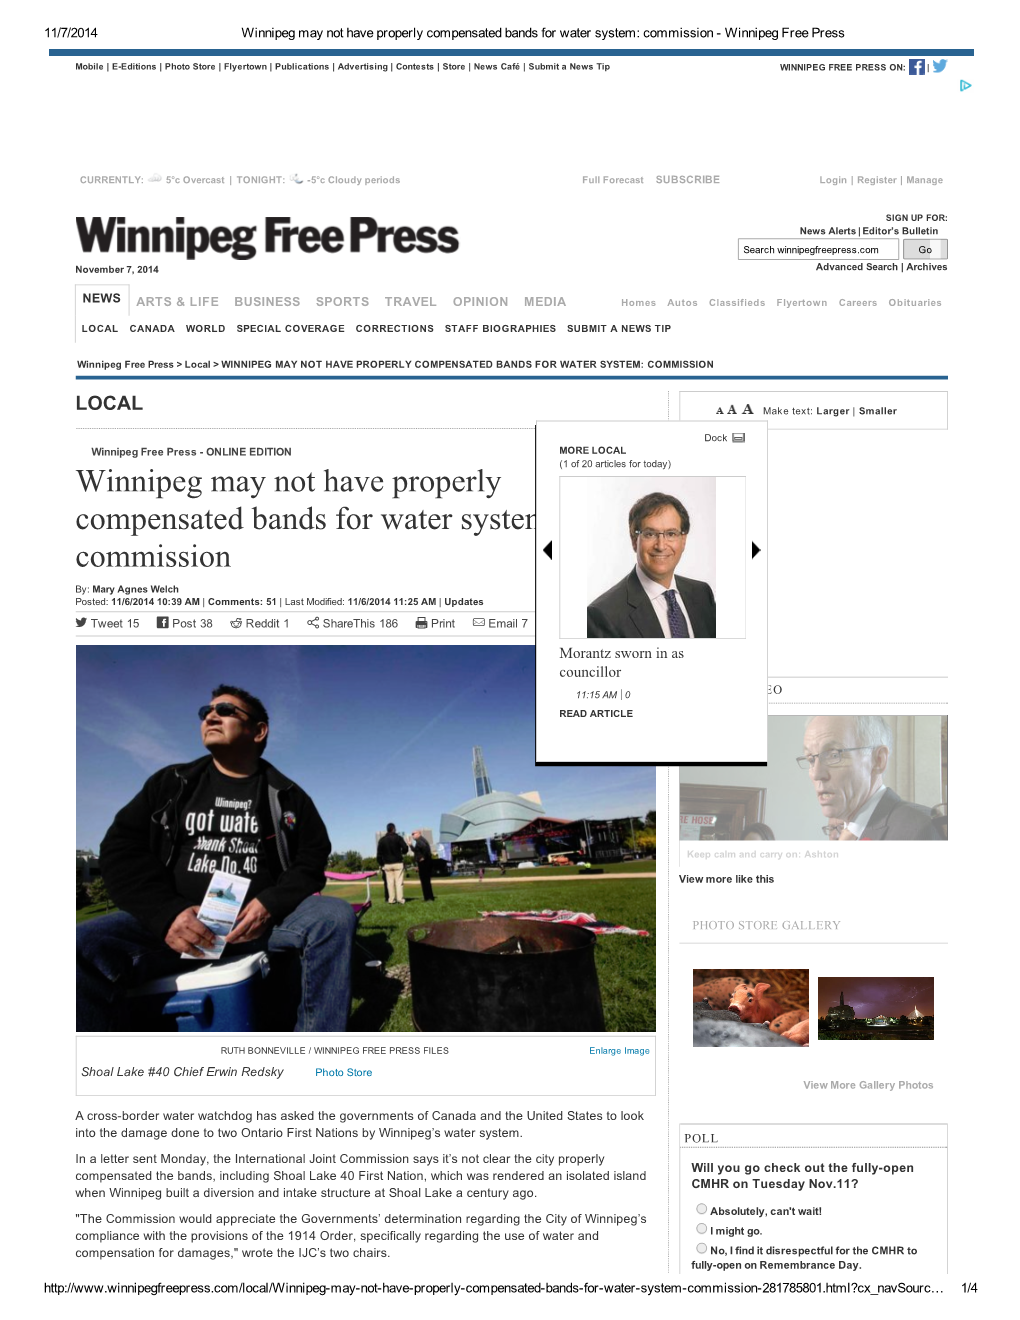 Winnipeg May Not Have Properly Compensated Bands for Water System: Commission - Winnipeg Free Press